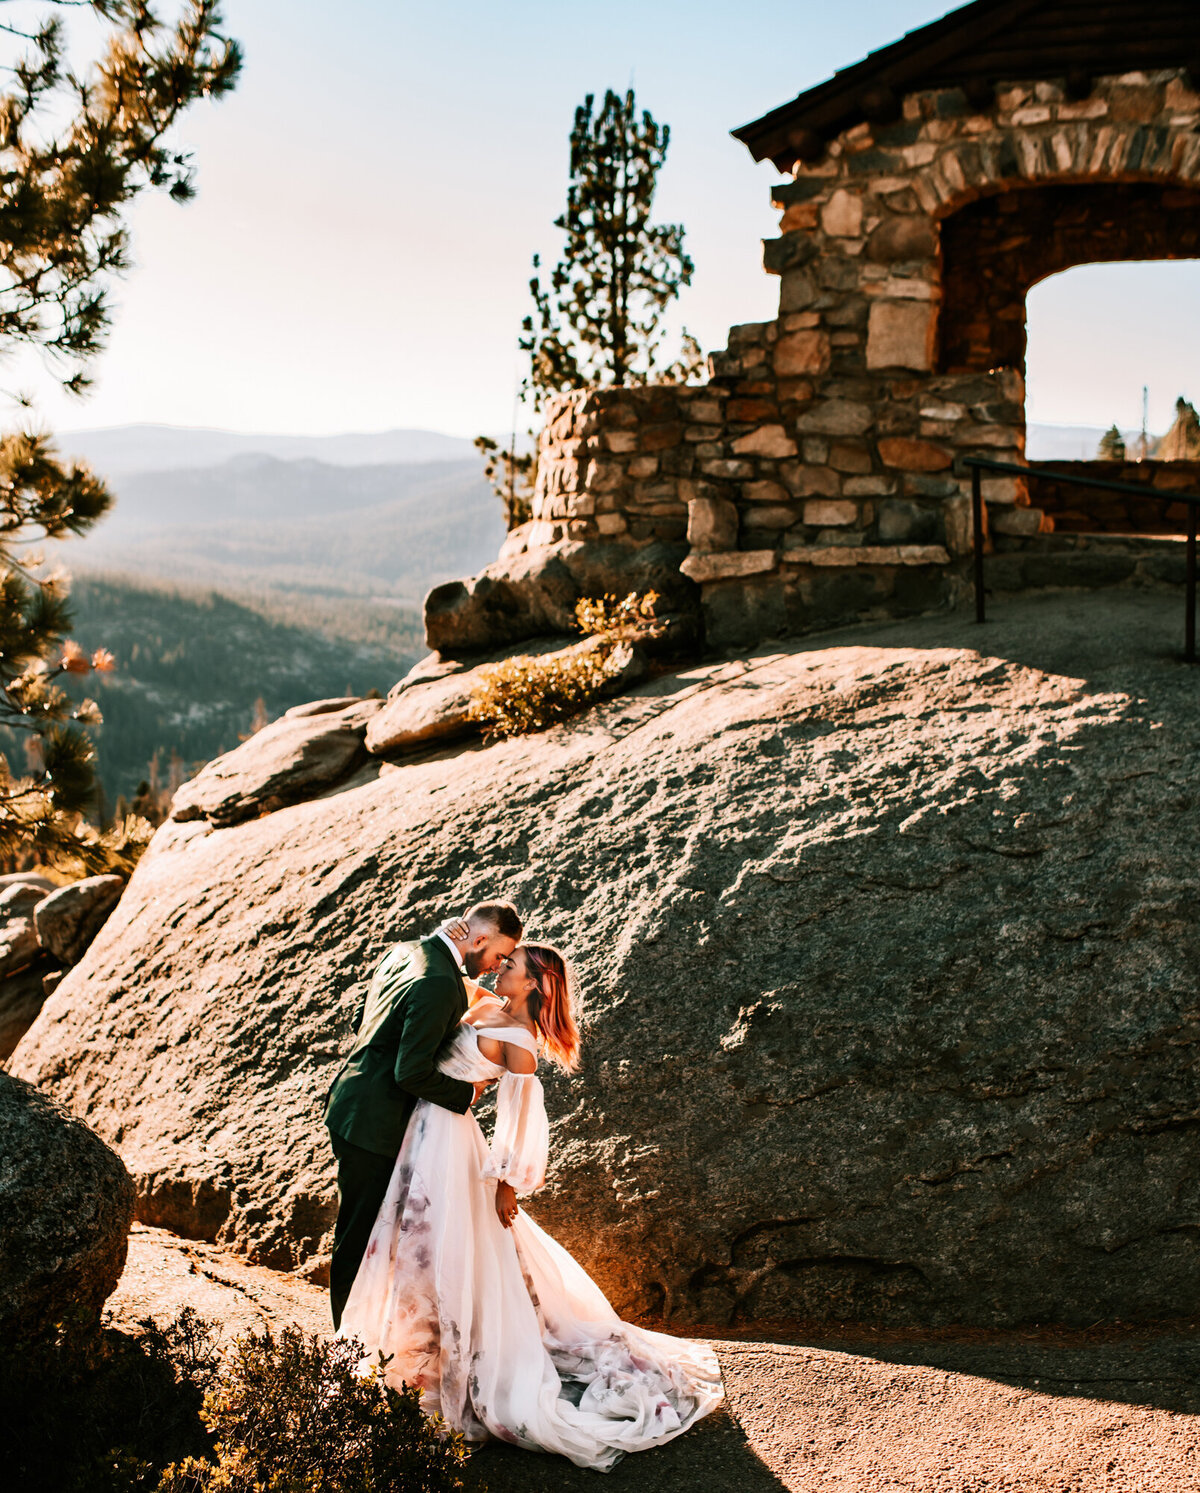 Couples Photography, Man in a blue blazer kissing and holding woman in a wedding dress at the bottom of a large rock